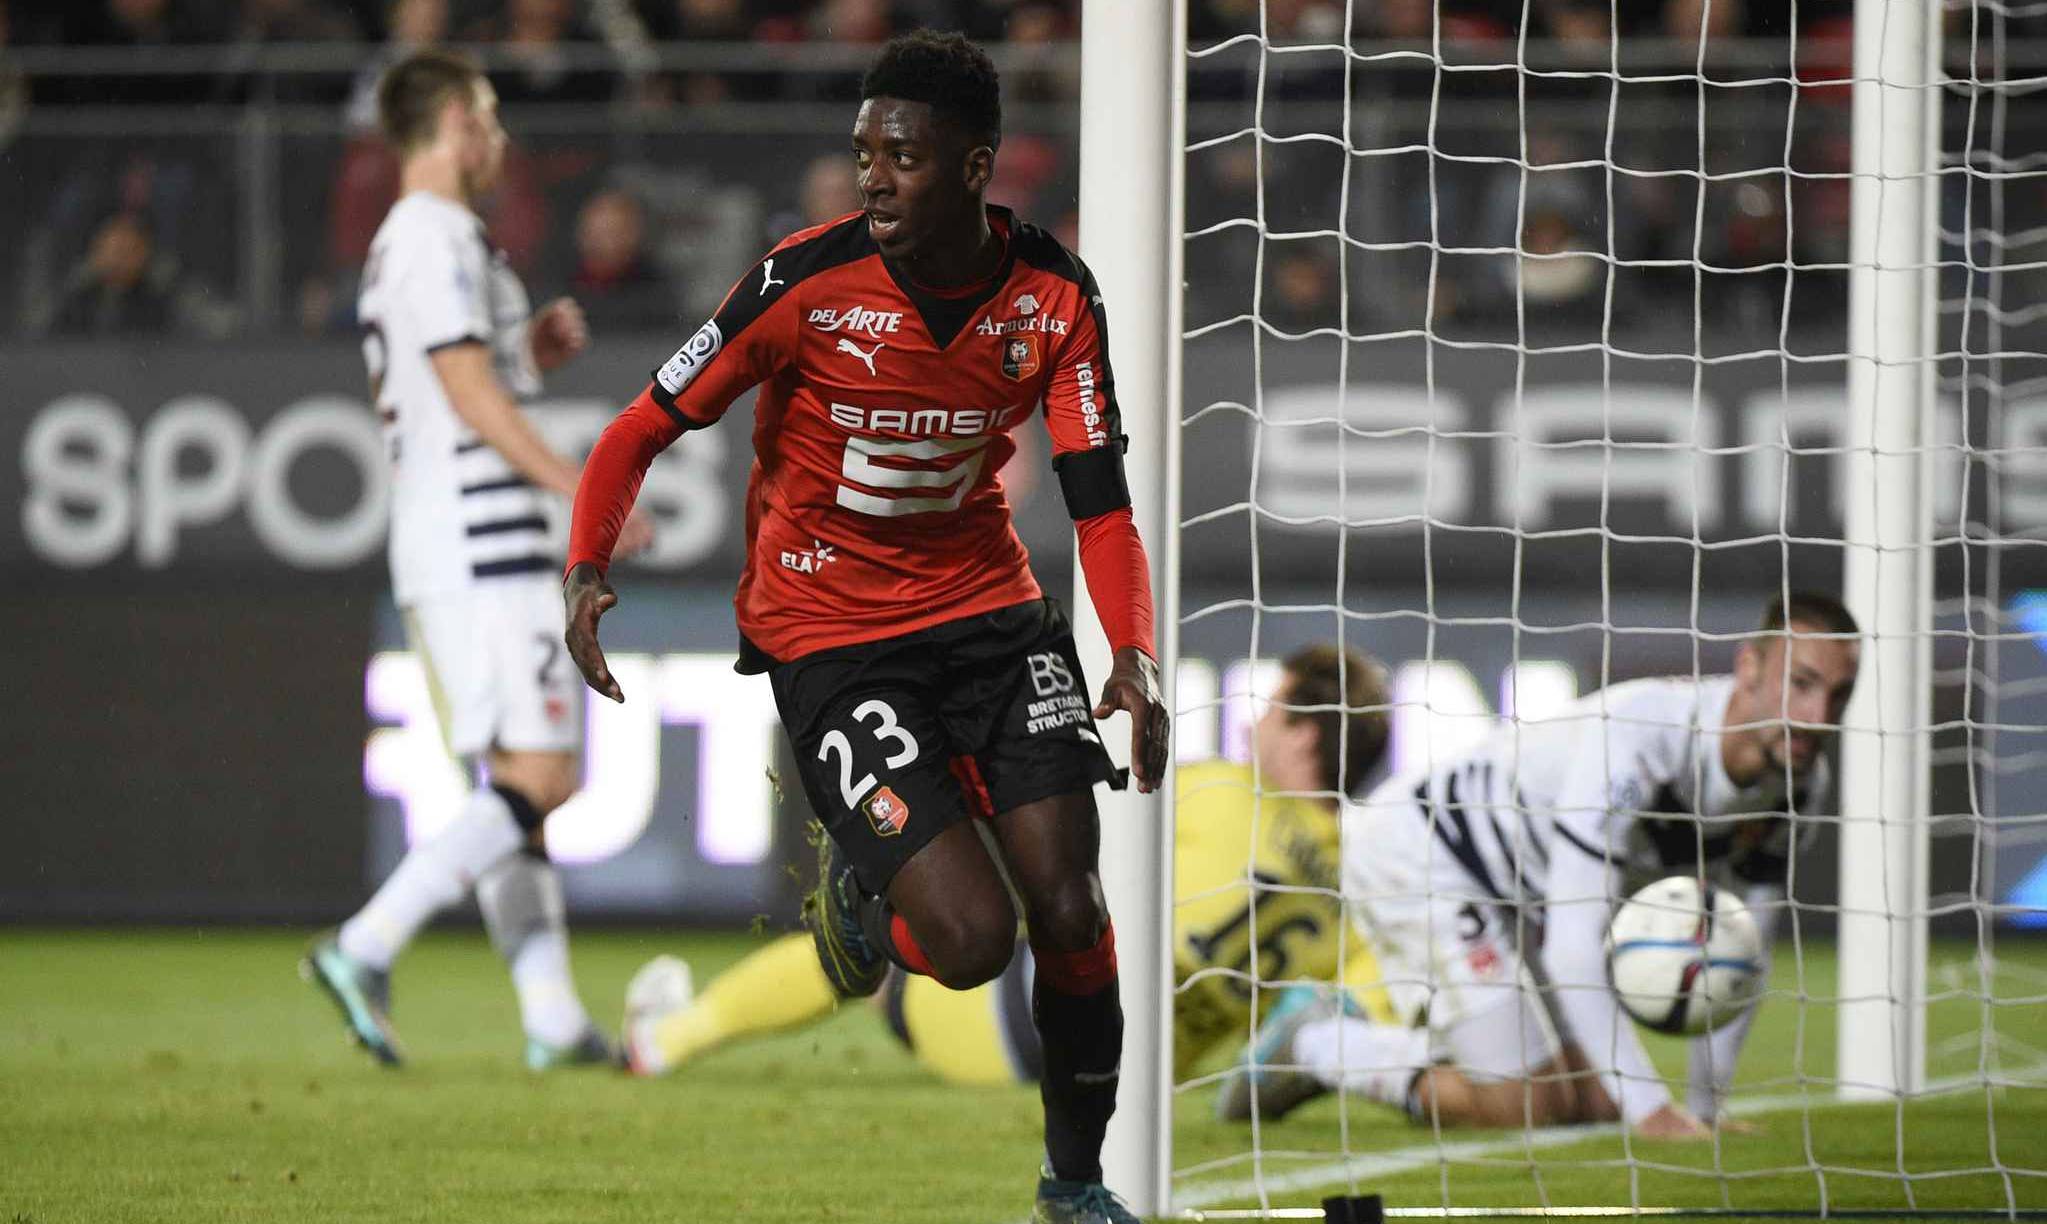 Dembele, of the Rennes, in the radar of the FC Barcelona